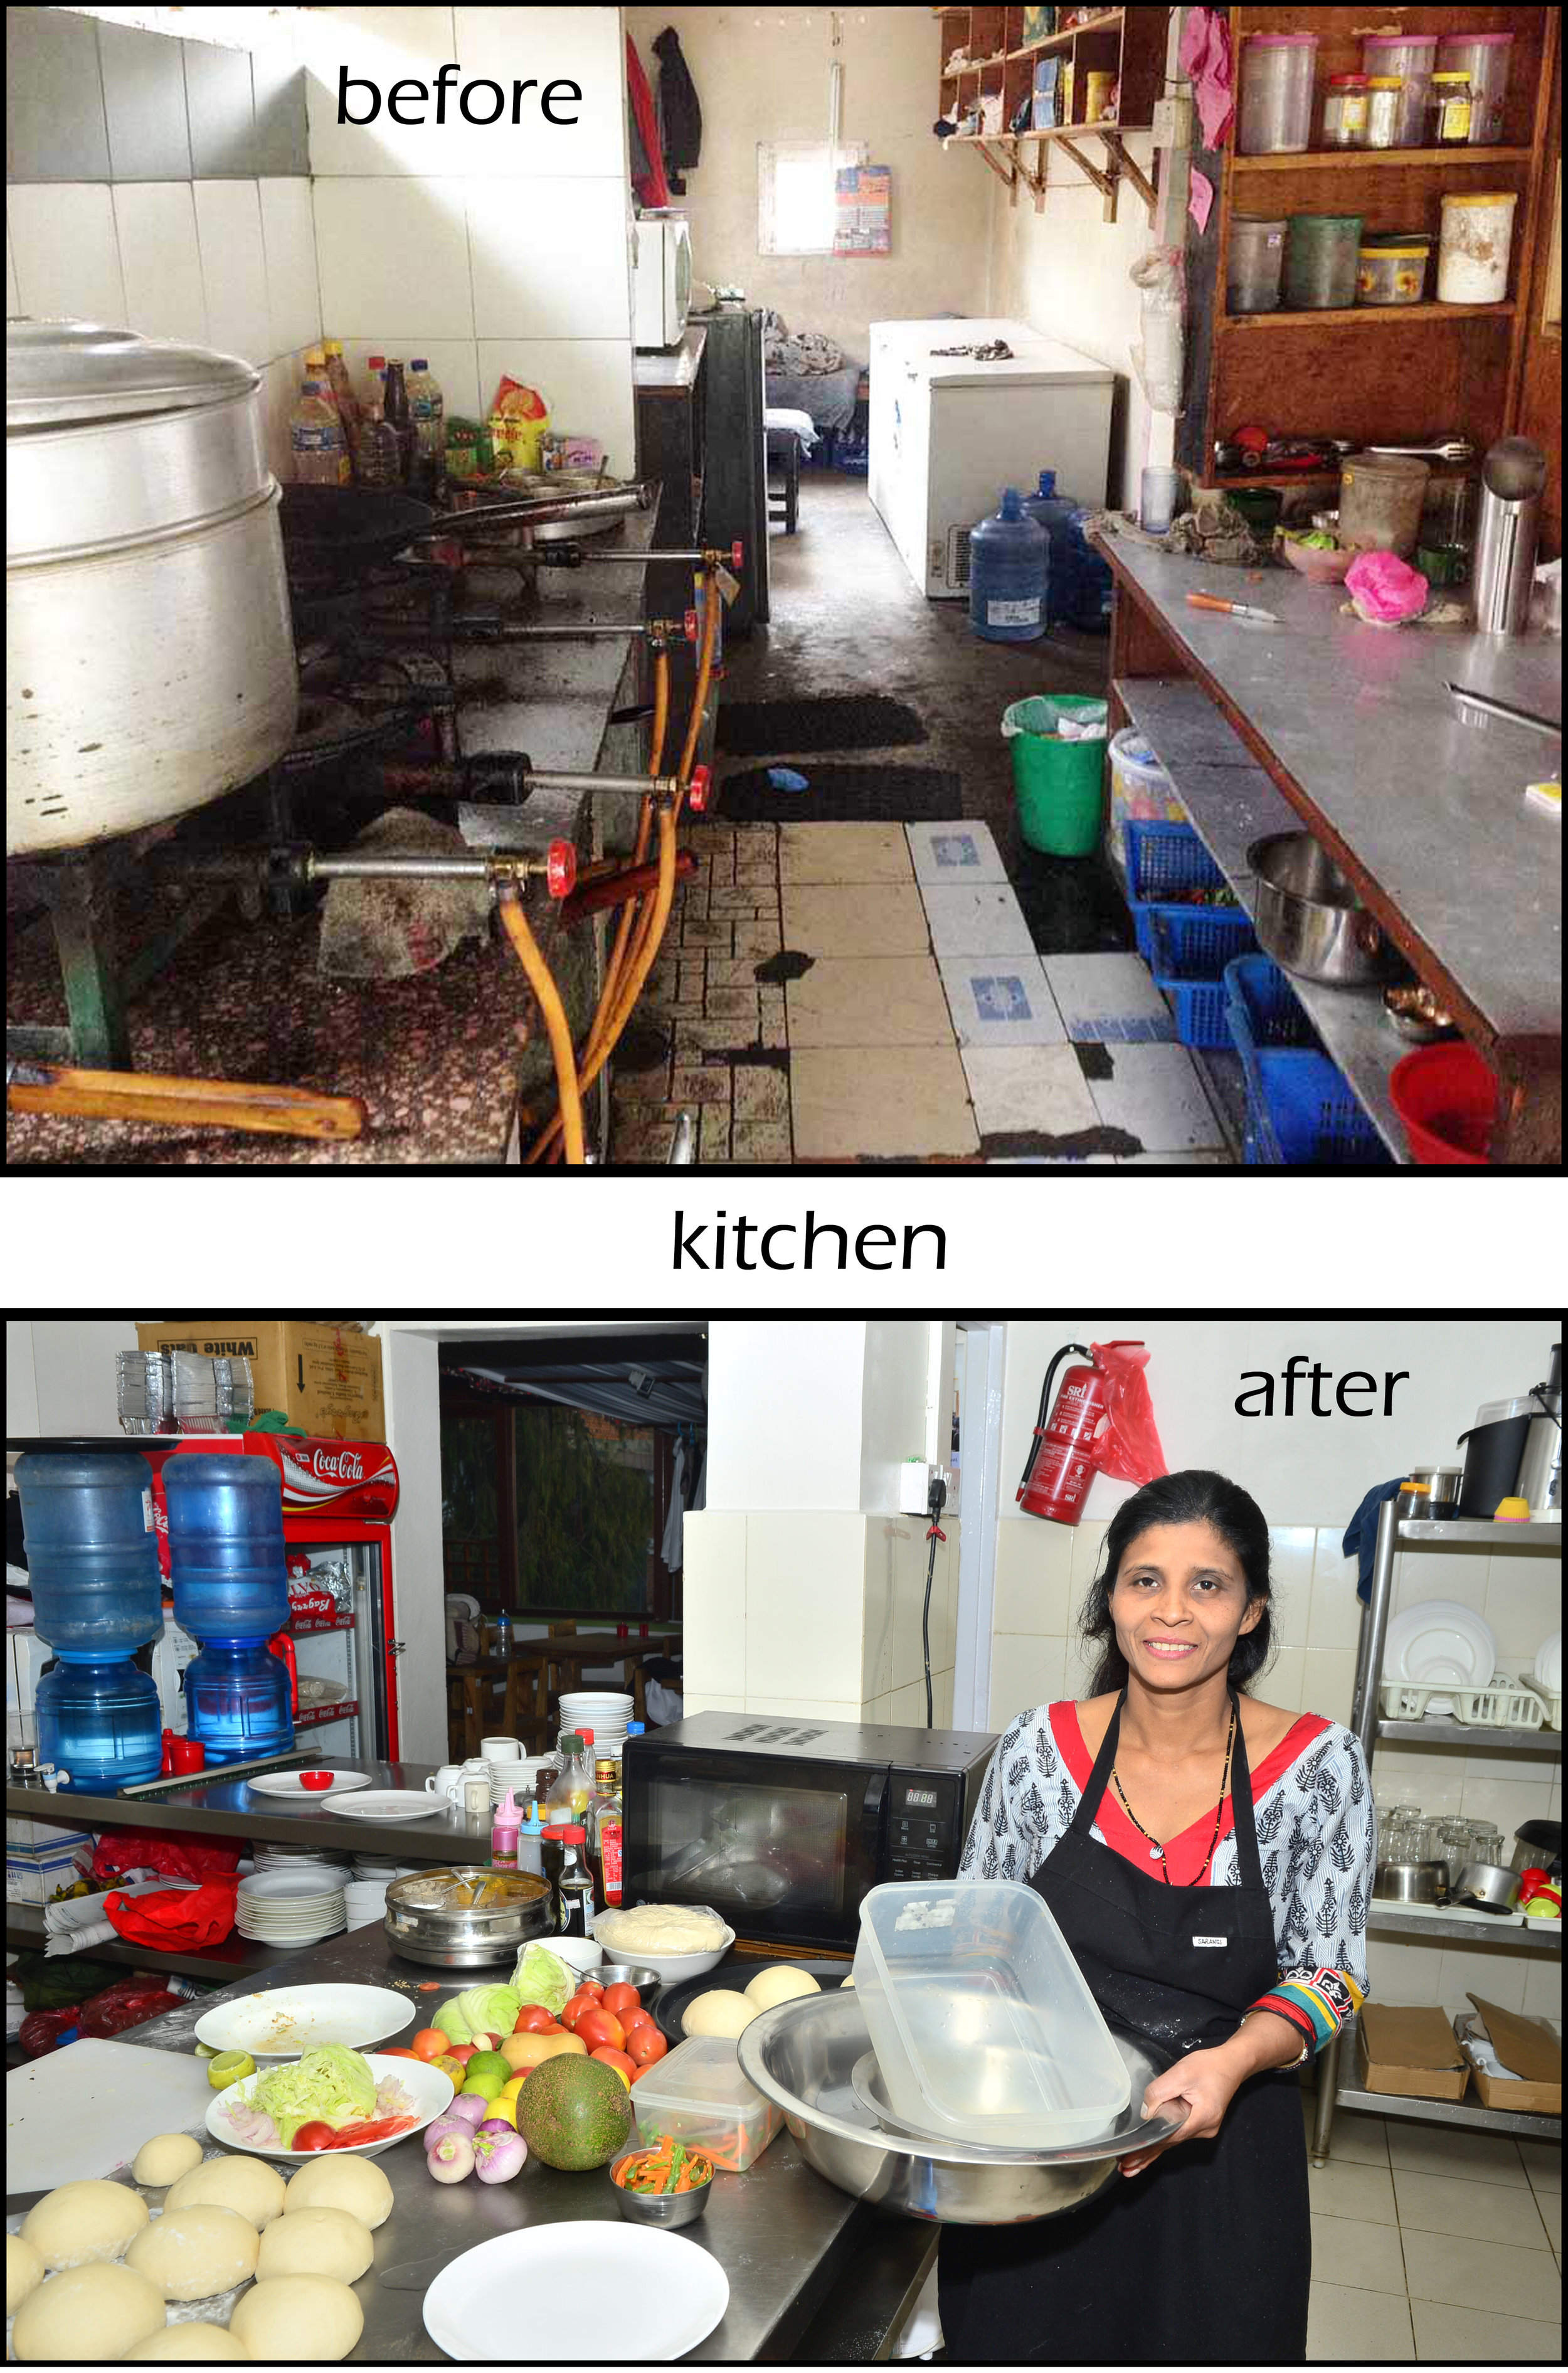 Before and after kitchen.jpg